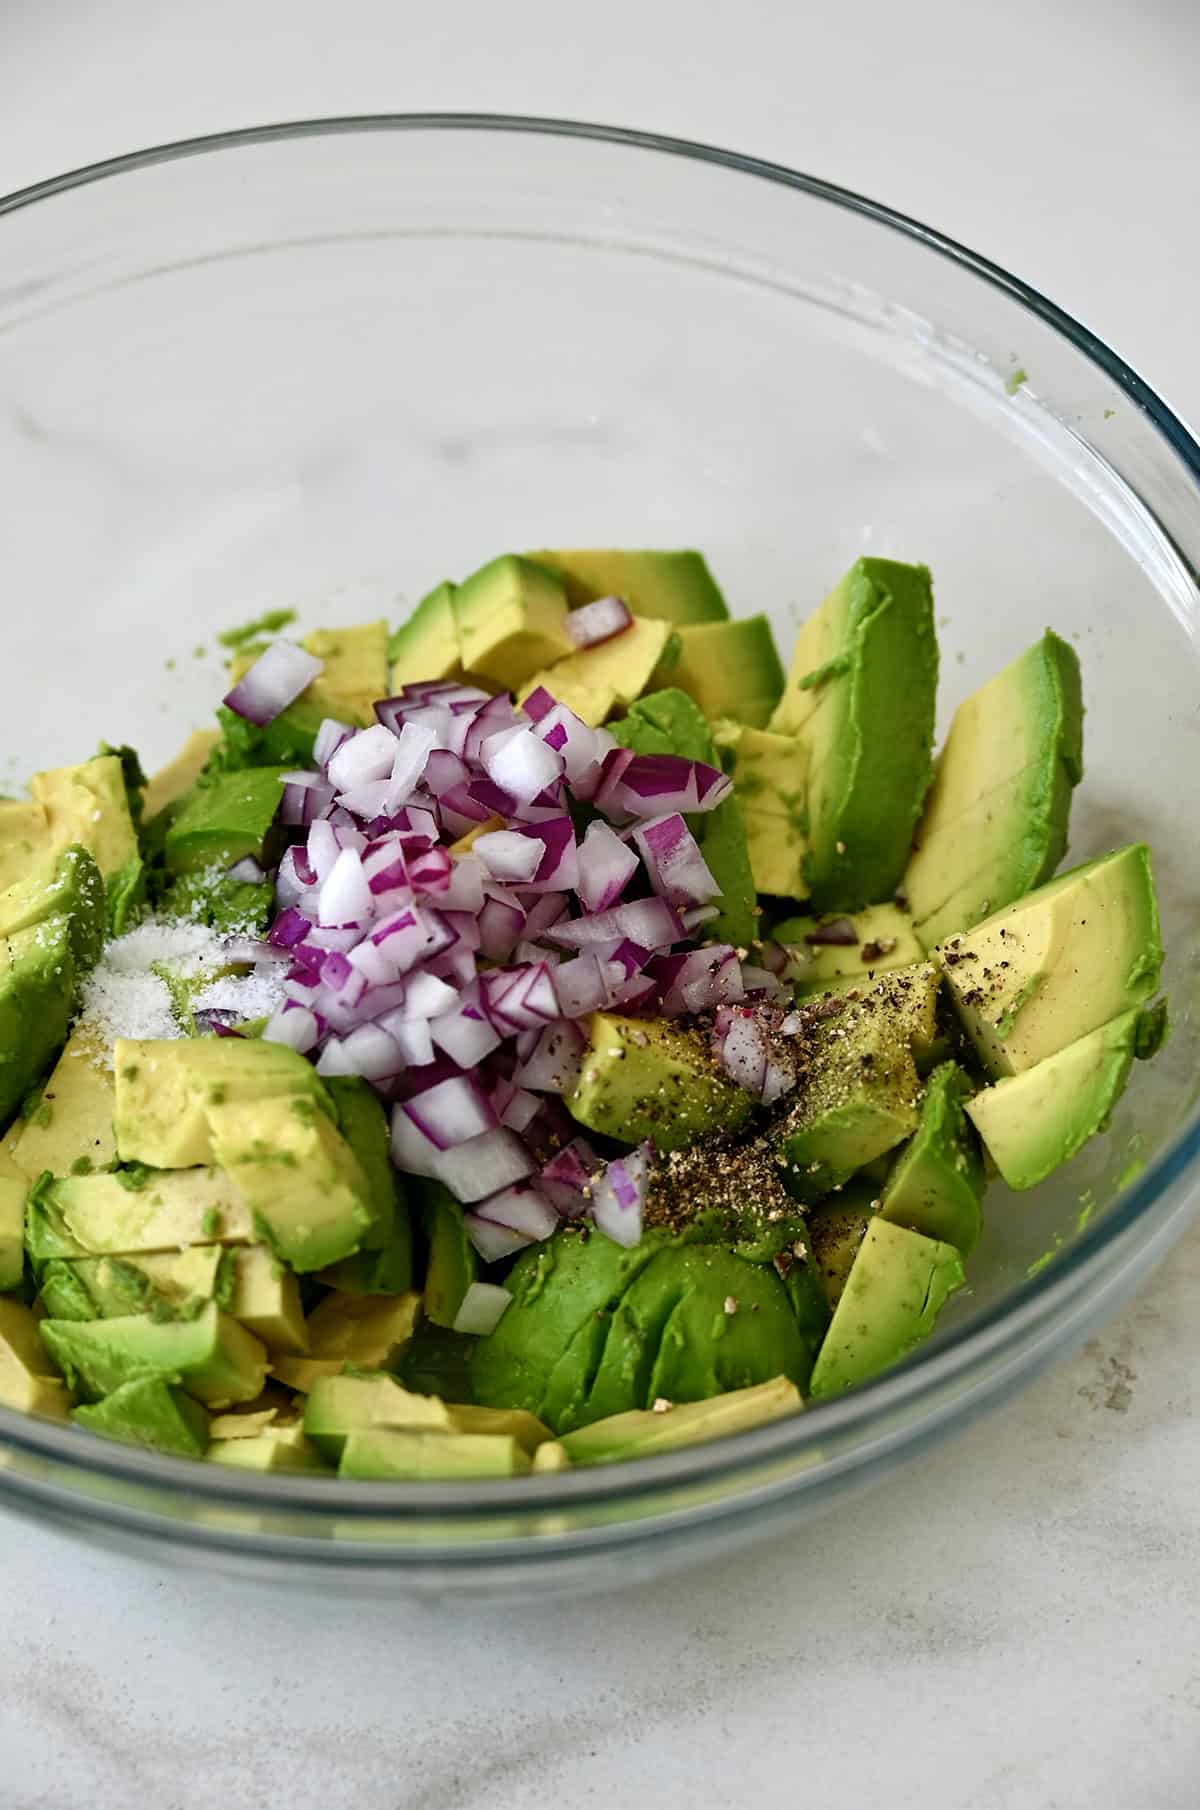 Diced red onions and avocado in a glass bowl.